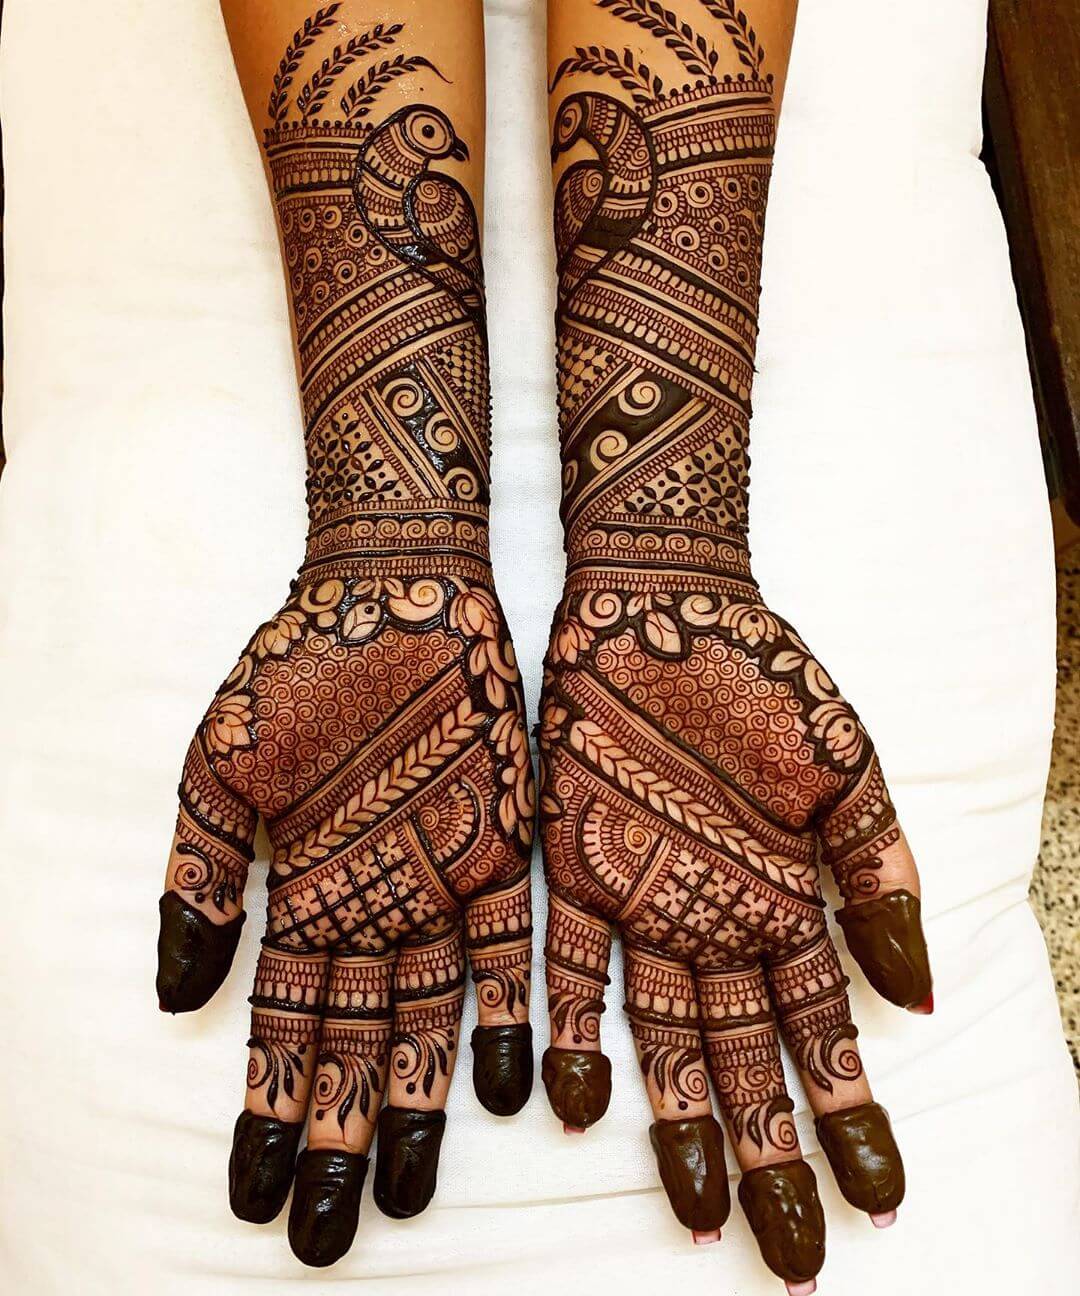 Bridal mehndi designs to cover the entire hands.